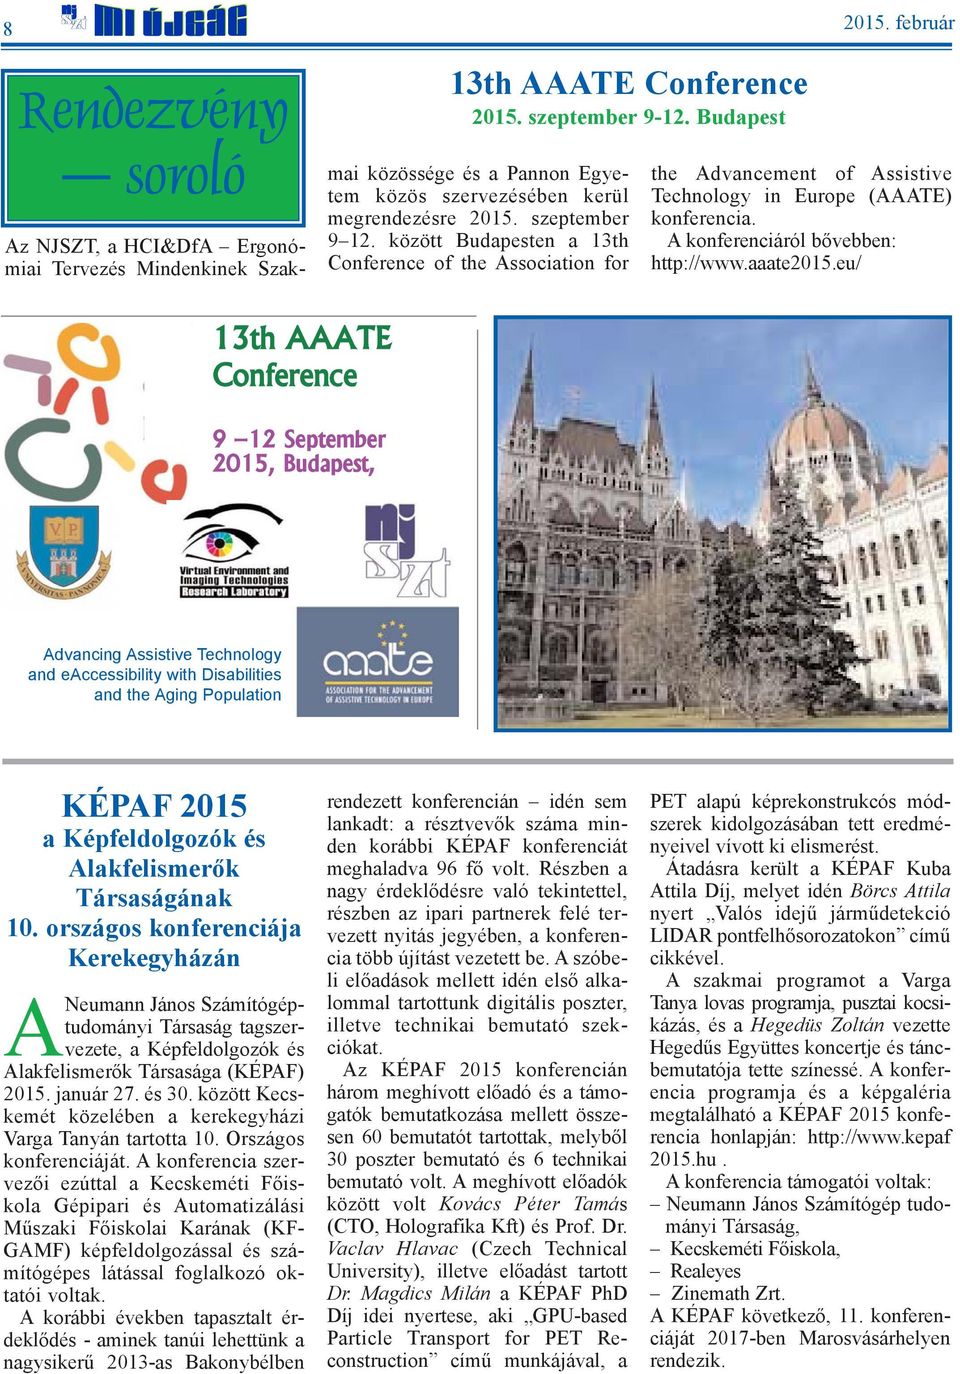 között Budapesten a 13th Conference of the Association for the Advancement of Assistive Technology in Europe (AAATE) konferencia. A konferenciáról bõvebben: http://www.aaate2015.